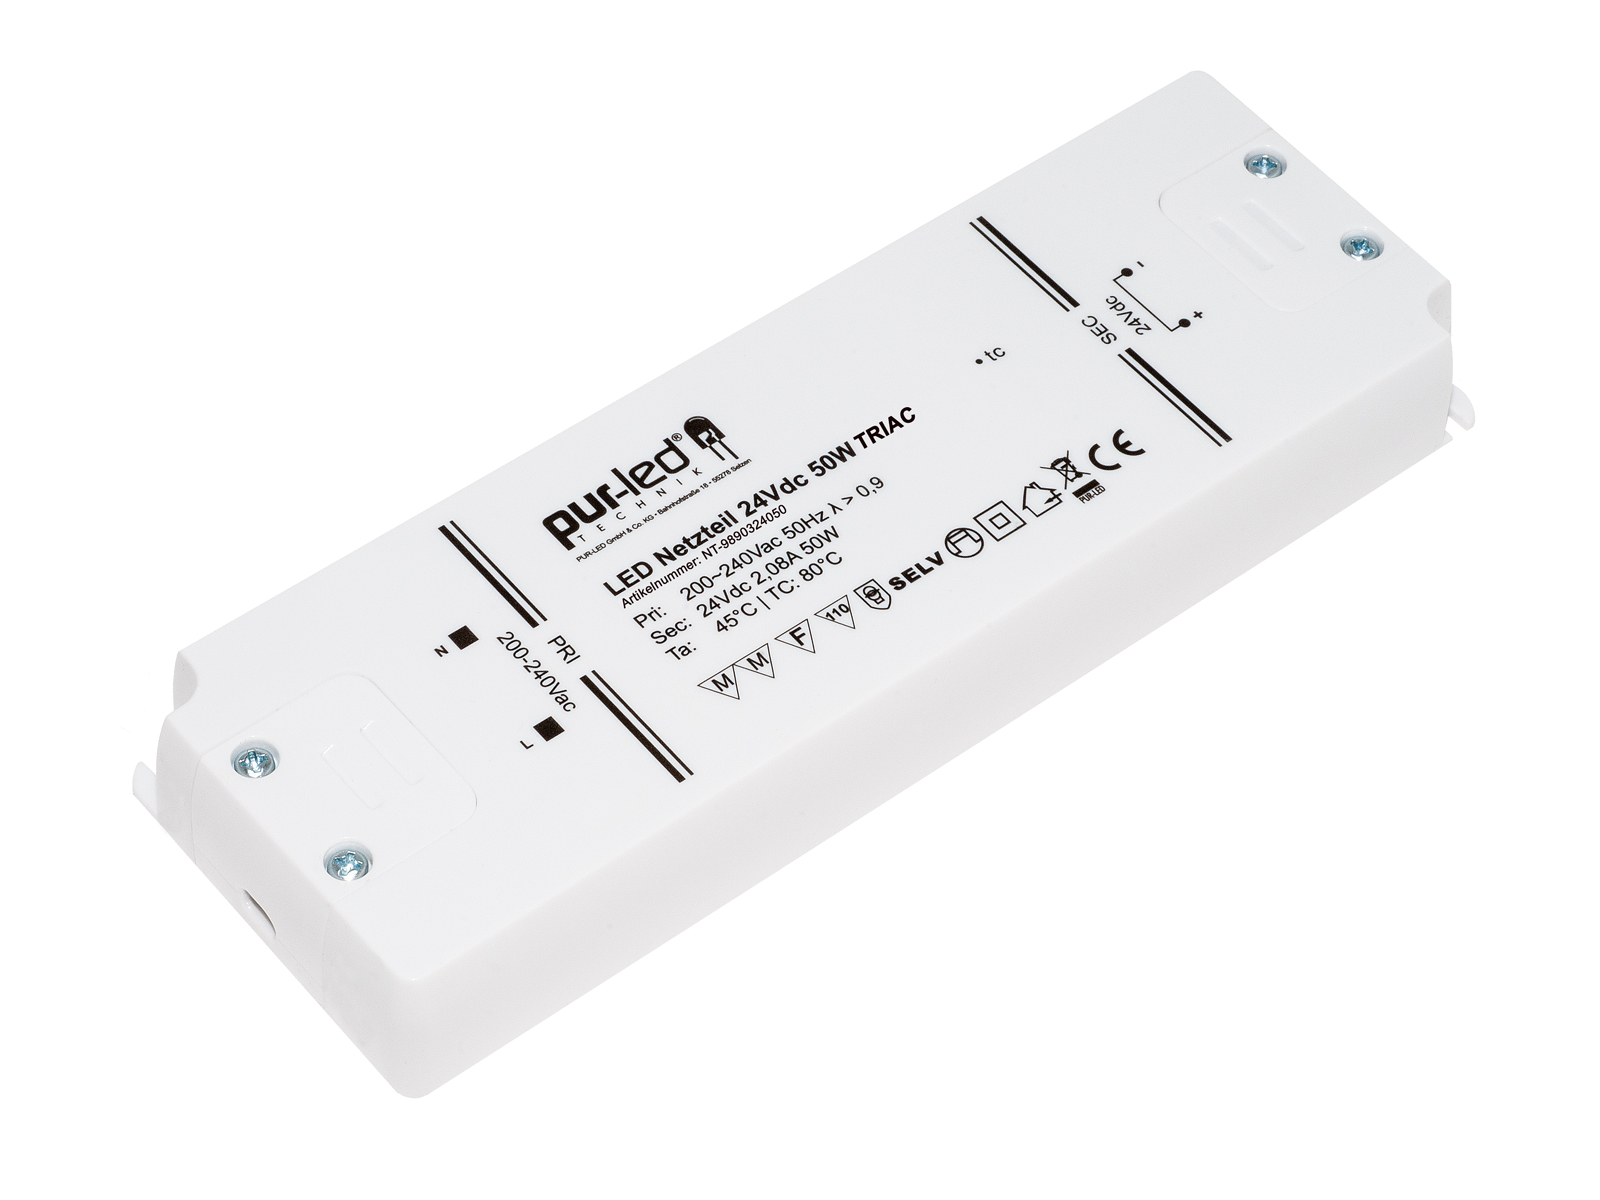 LED Netzteil 24Vdc 50W 2,08A Indoor kaufen | PUR-LED